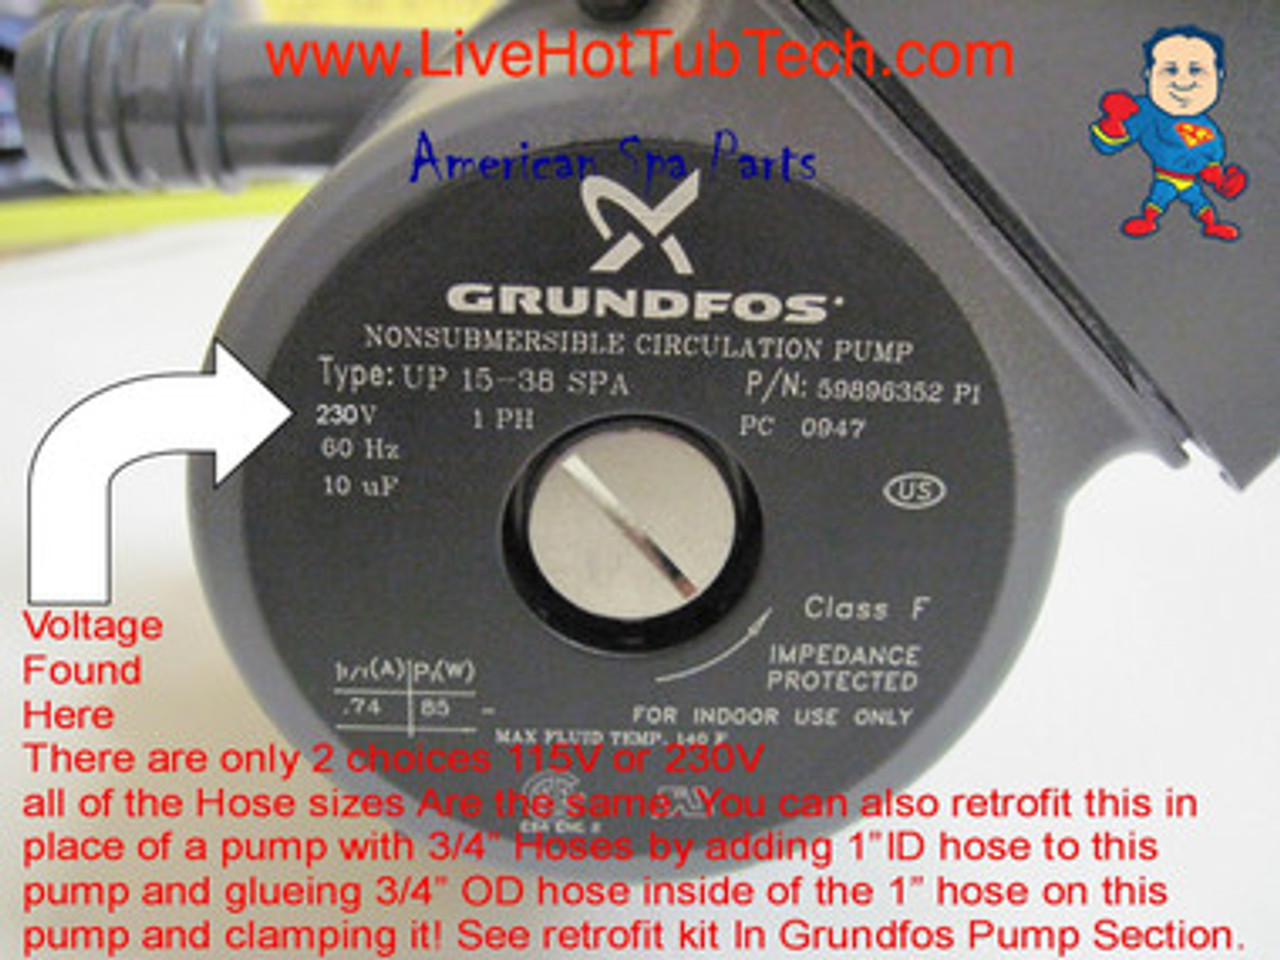 This shows where to find your voltage on your Grundfos Circulation Pump.